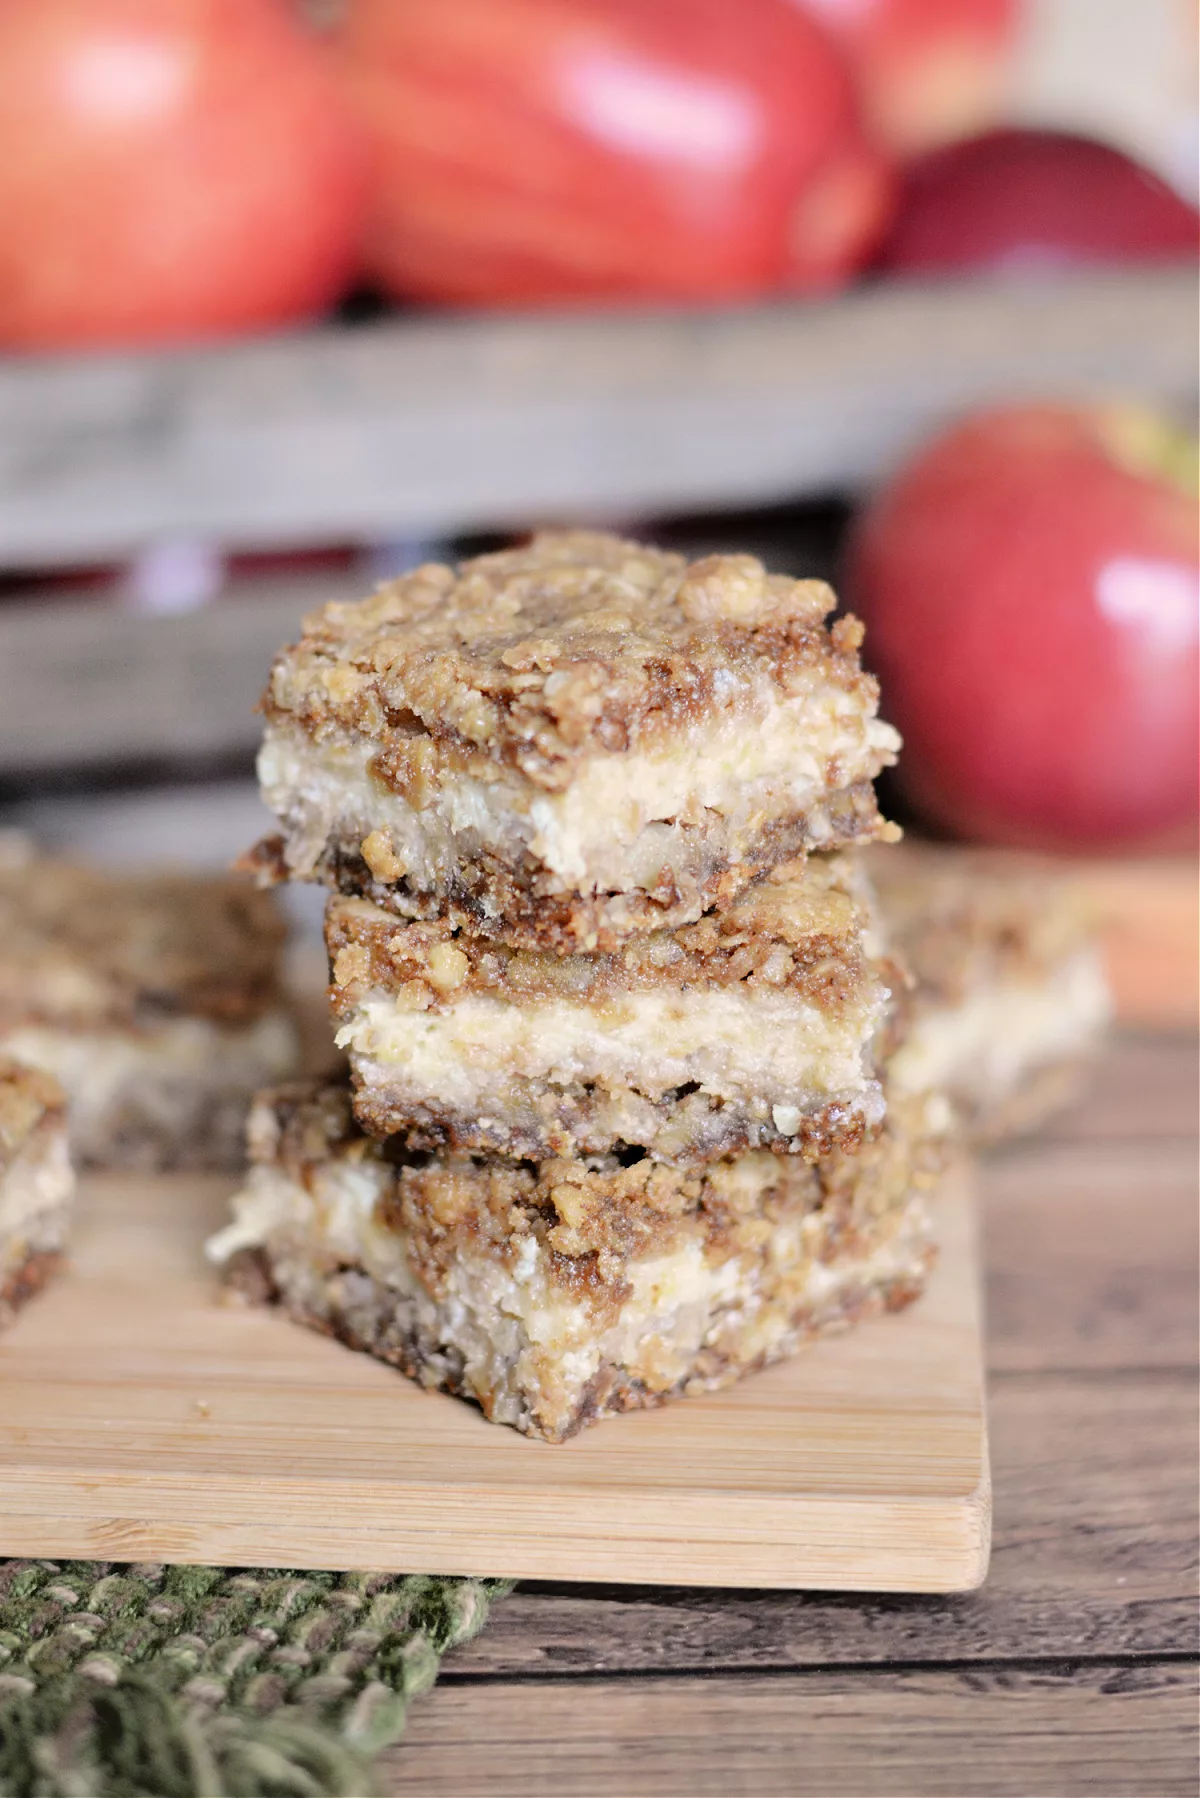 bars made from Walnut and Apples in a stack